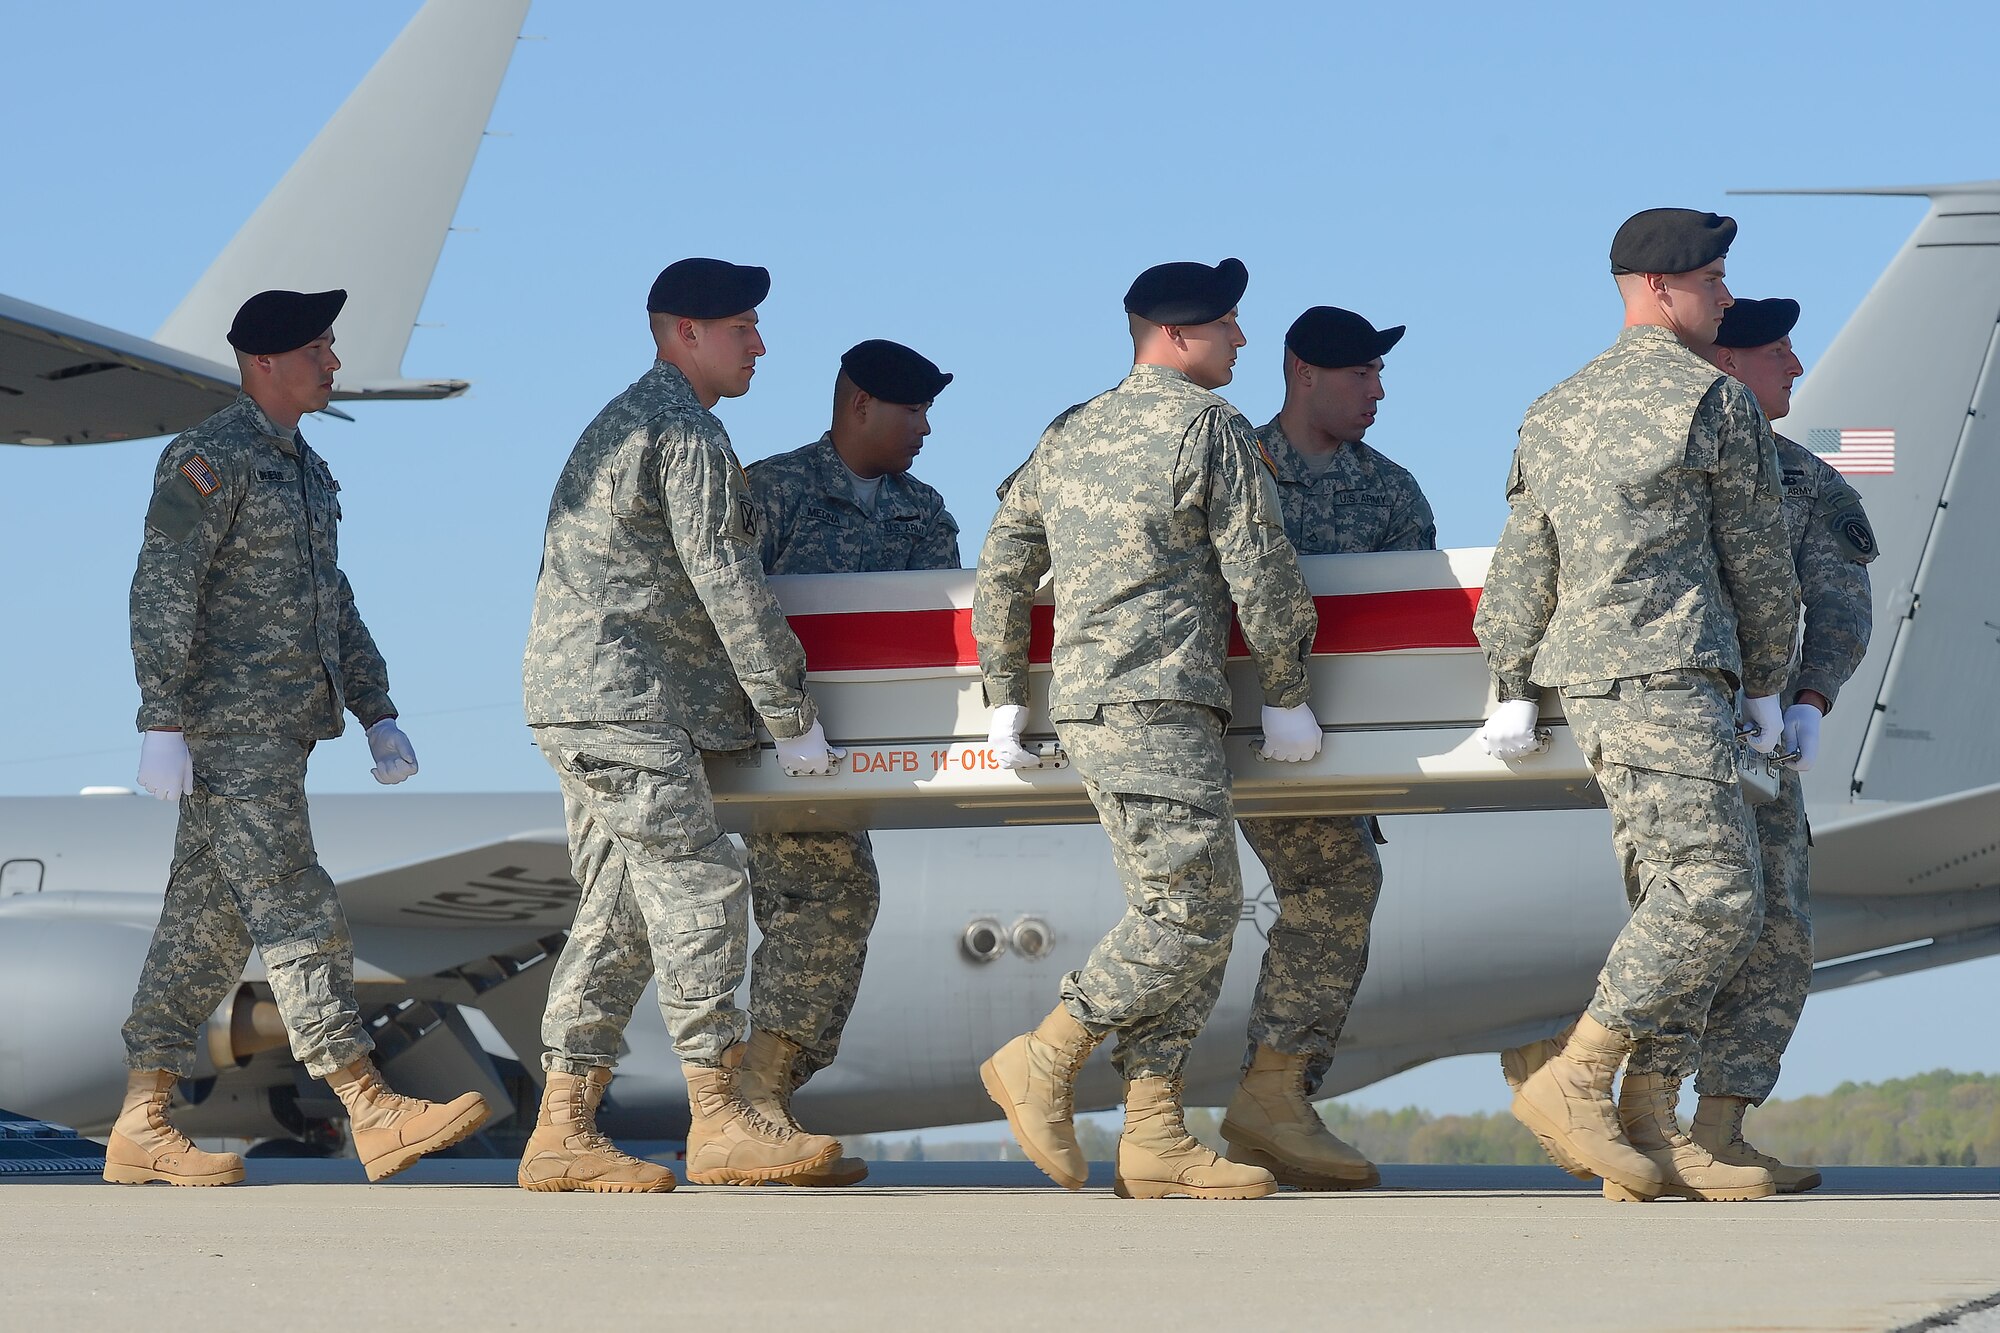 A U.S. Army carry team transfers the remains of Army Capt. Aaron R. Blanchard, of Selah, Wash., during a dignified transfer April 25, 2013, at Dover Air Force Base, Del. Blanchard was assigned to Headquarter and Headquarters Company, 2nd Aviation Battalion, 10th Combat Aviation Brigade, Ft. Drum, N.Y. (U.S. Air Force photo/Greg L. Davis)